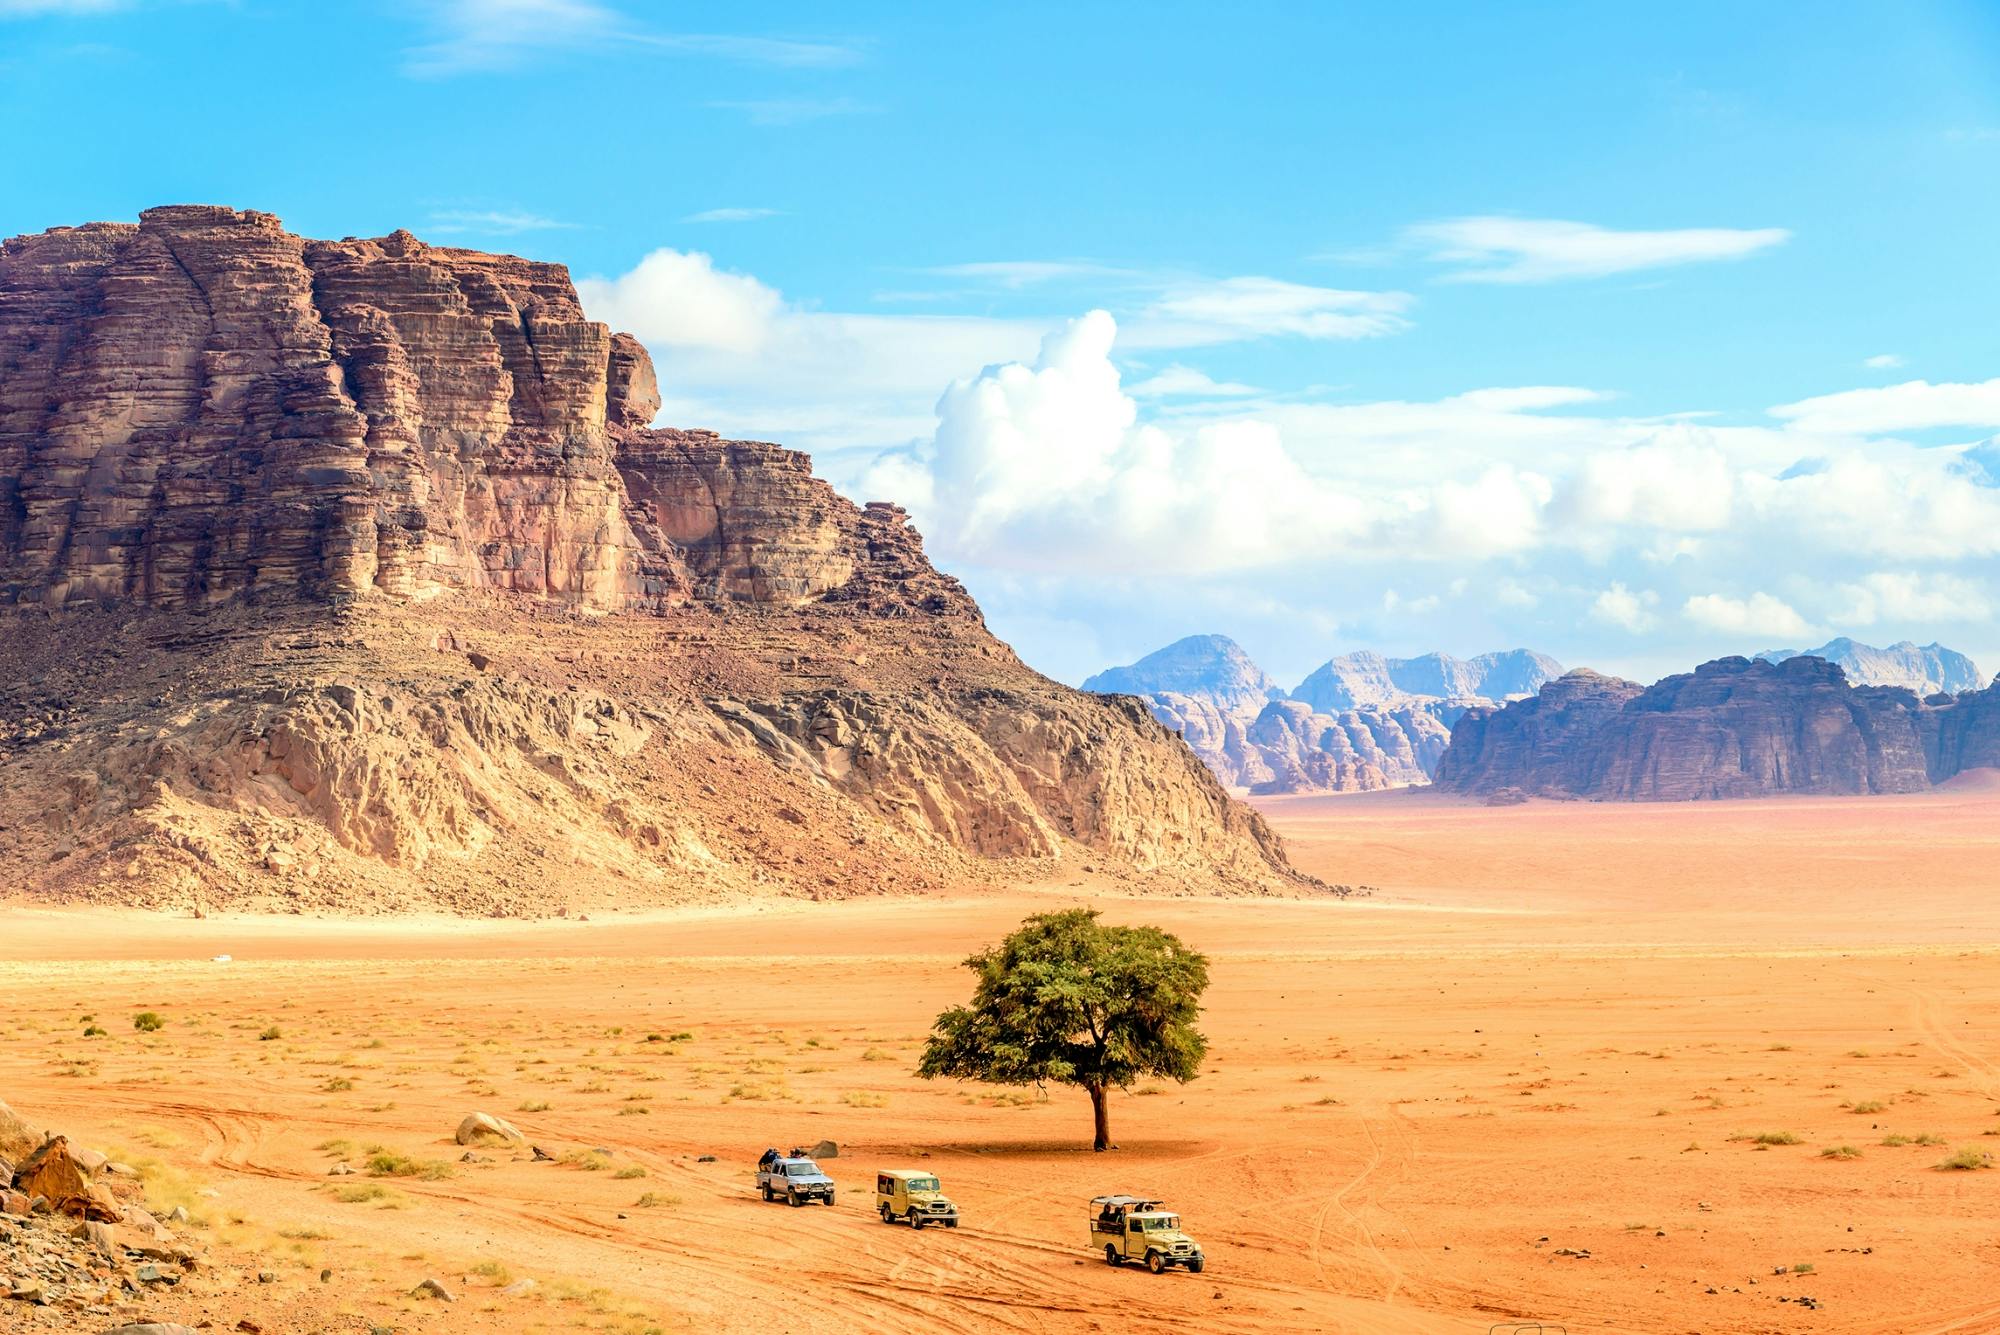 Private Wadi Rum sunset jeep tour from Aqaba